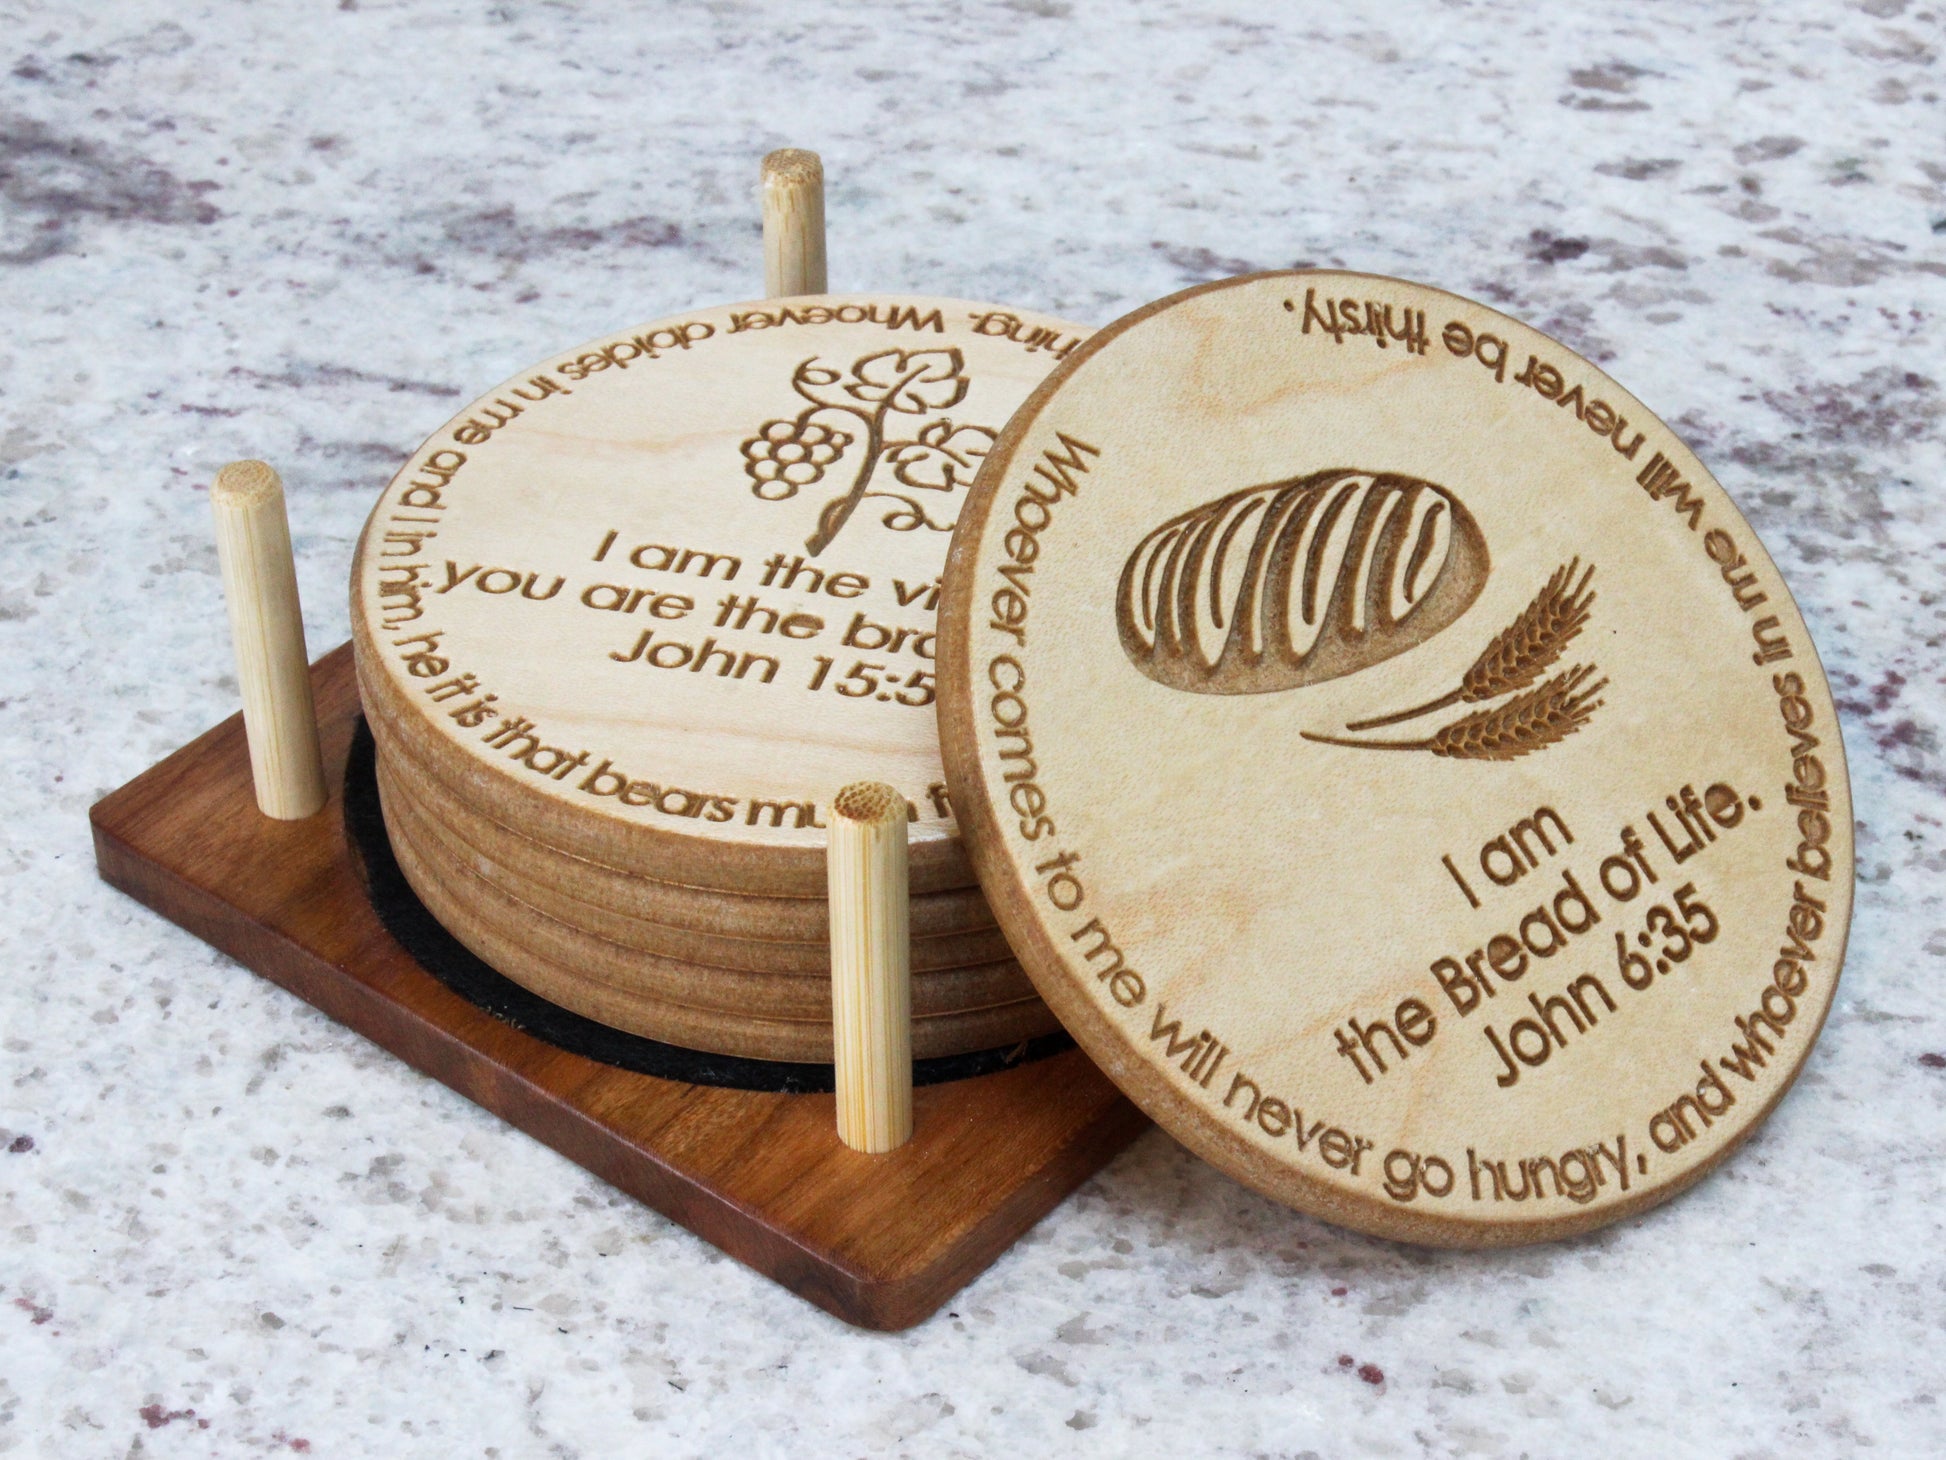 Handmade wooden coaster set of six coasters with stand. Each coaster engraved with a different verse from the Gospels featuring one of Jesus' "I Am" statements. 